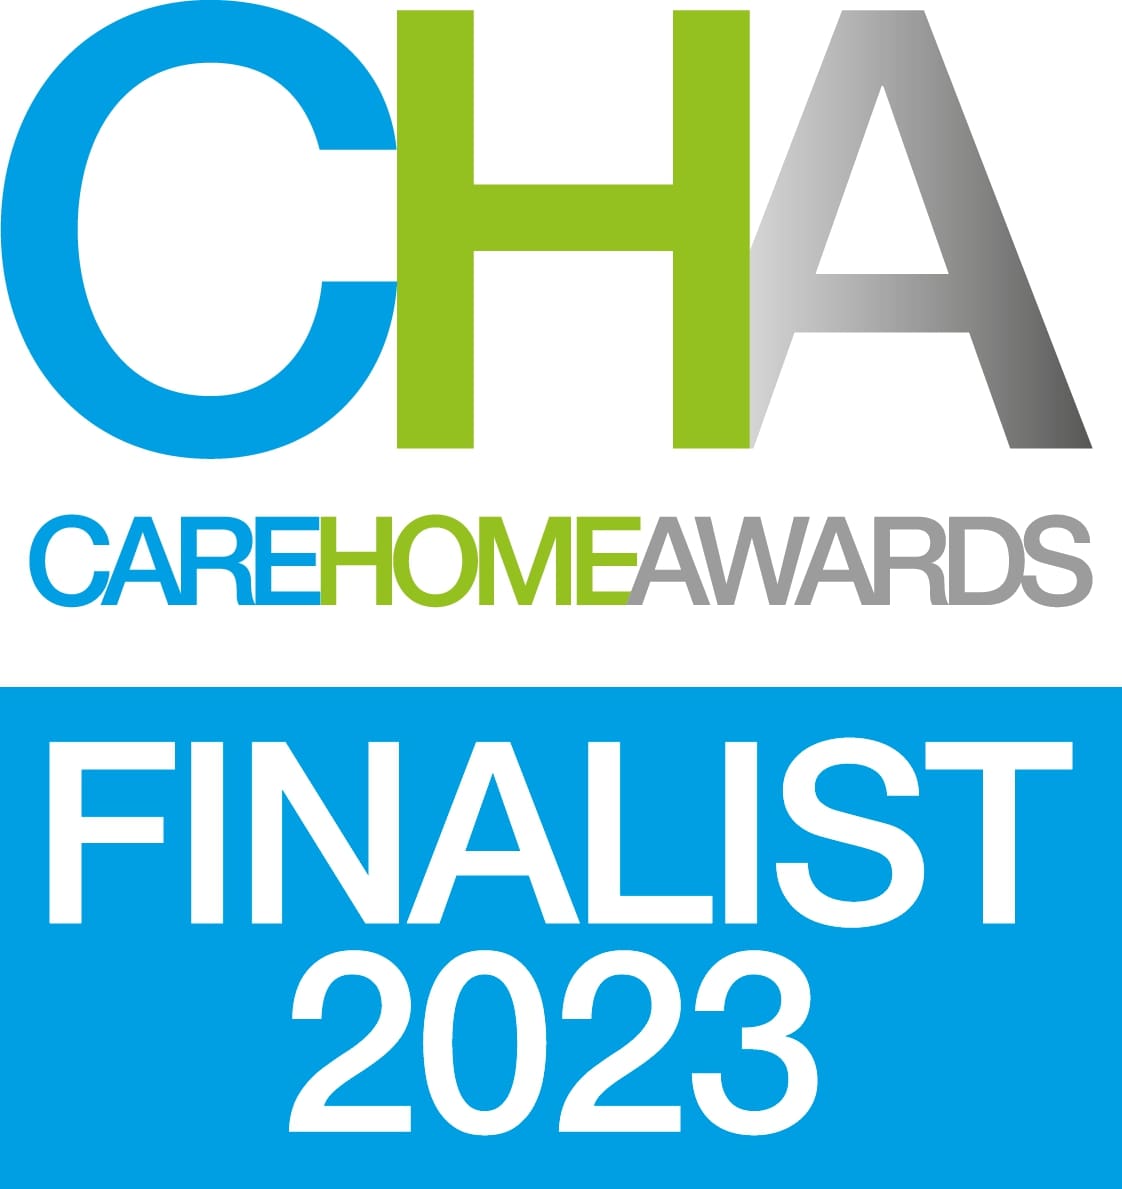 Care Home Awards 2023 Finalist - Best for Indoor or Outdoor Communal Spaces 